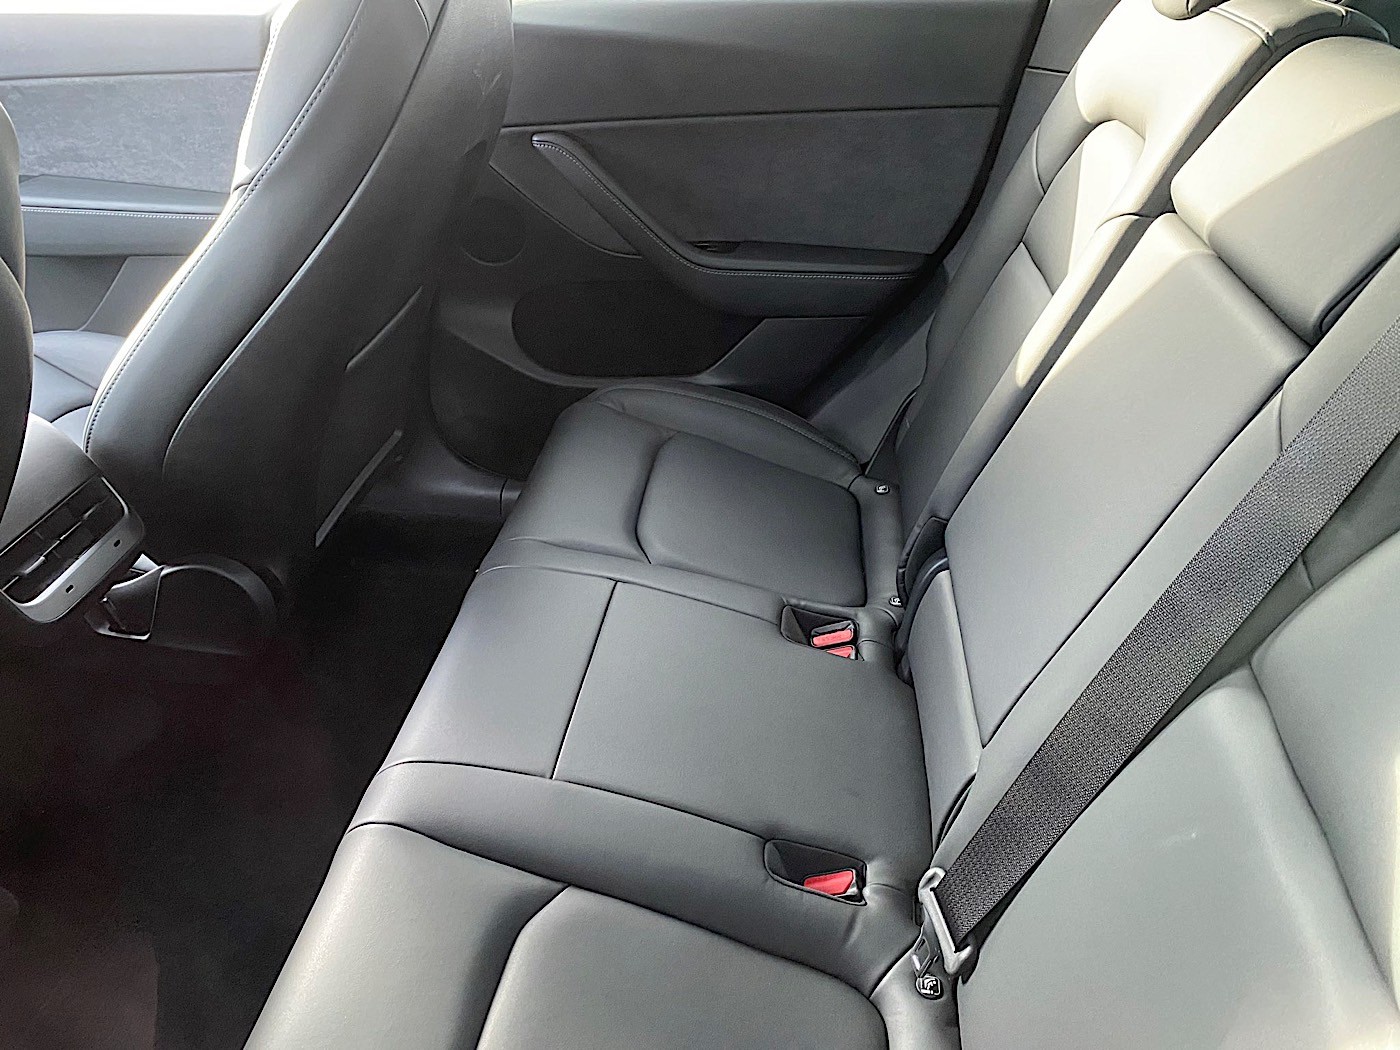 Here Are the First Images of the Tesla Model Y Interior in the Wild